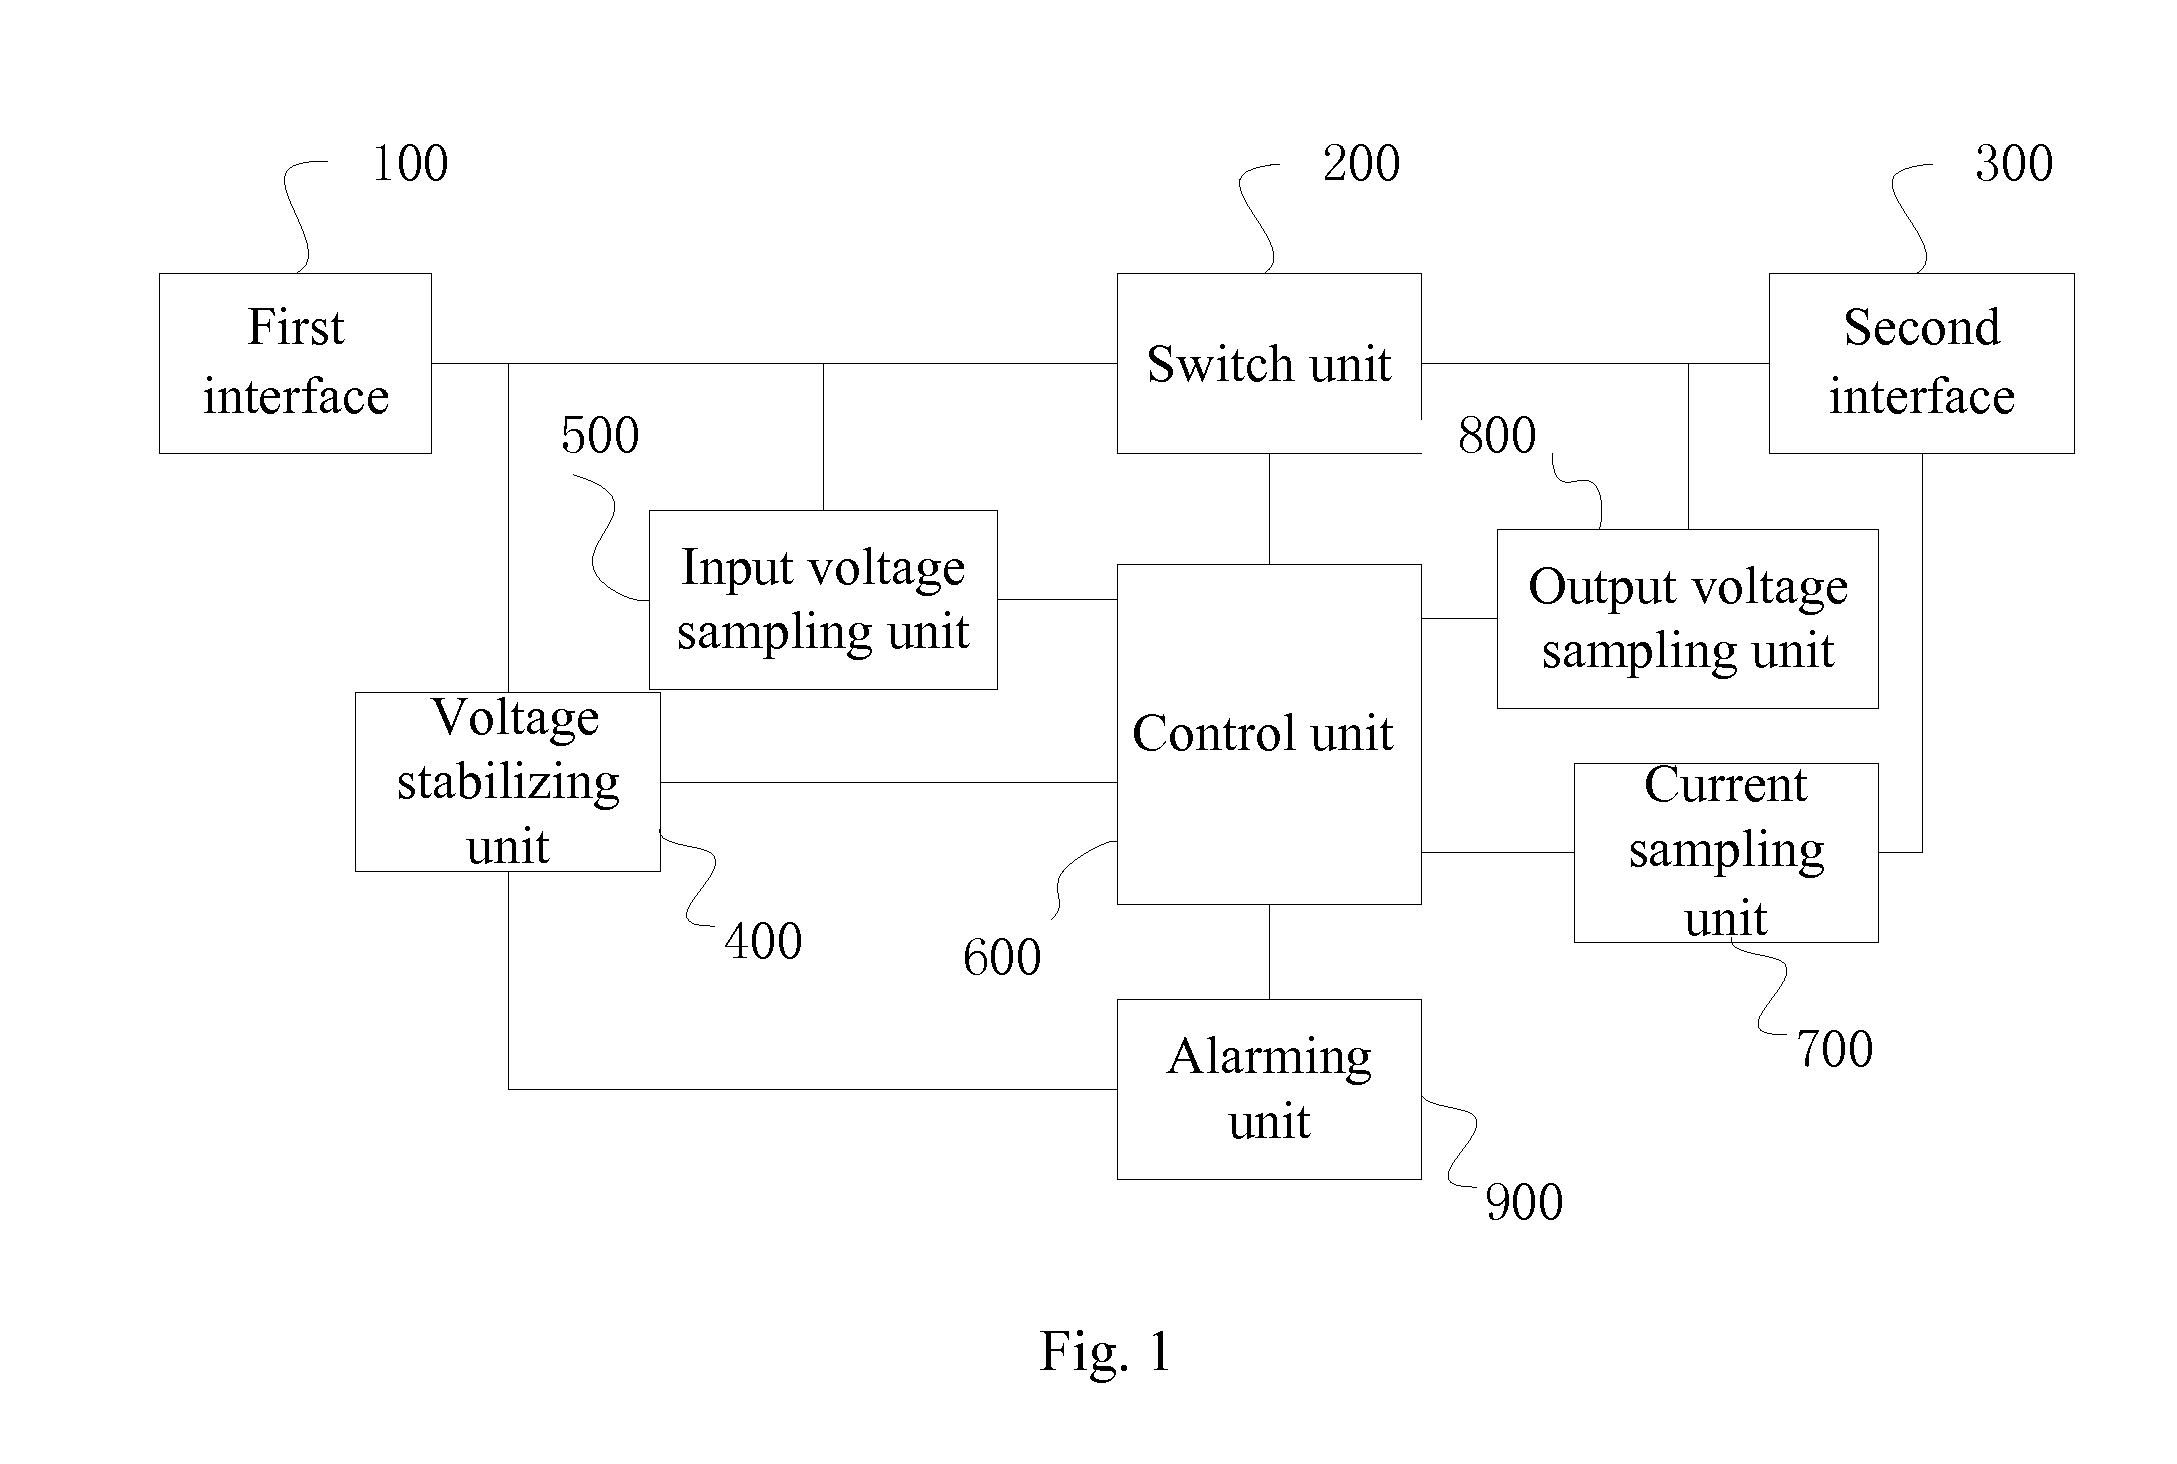 Charger with over-voltage and over-current protection and method for using the same